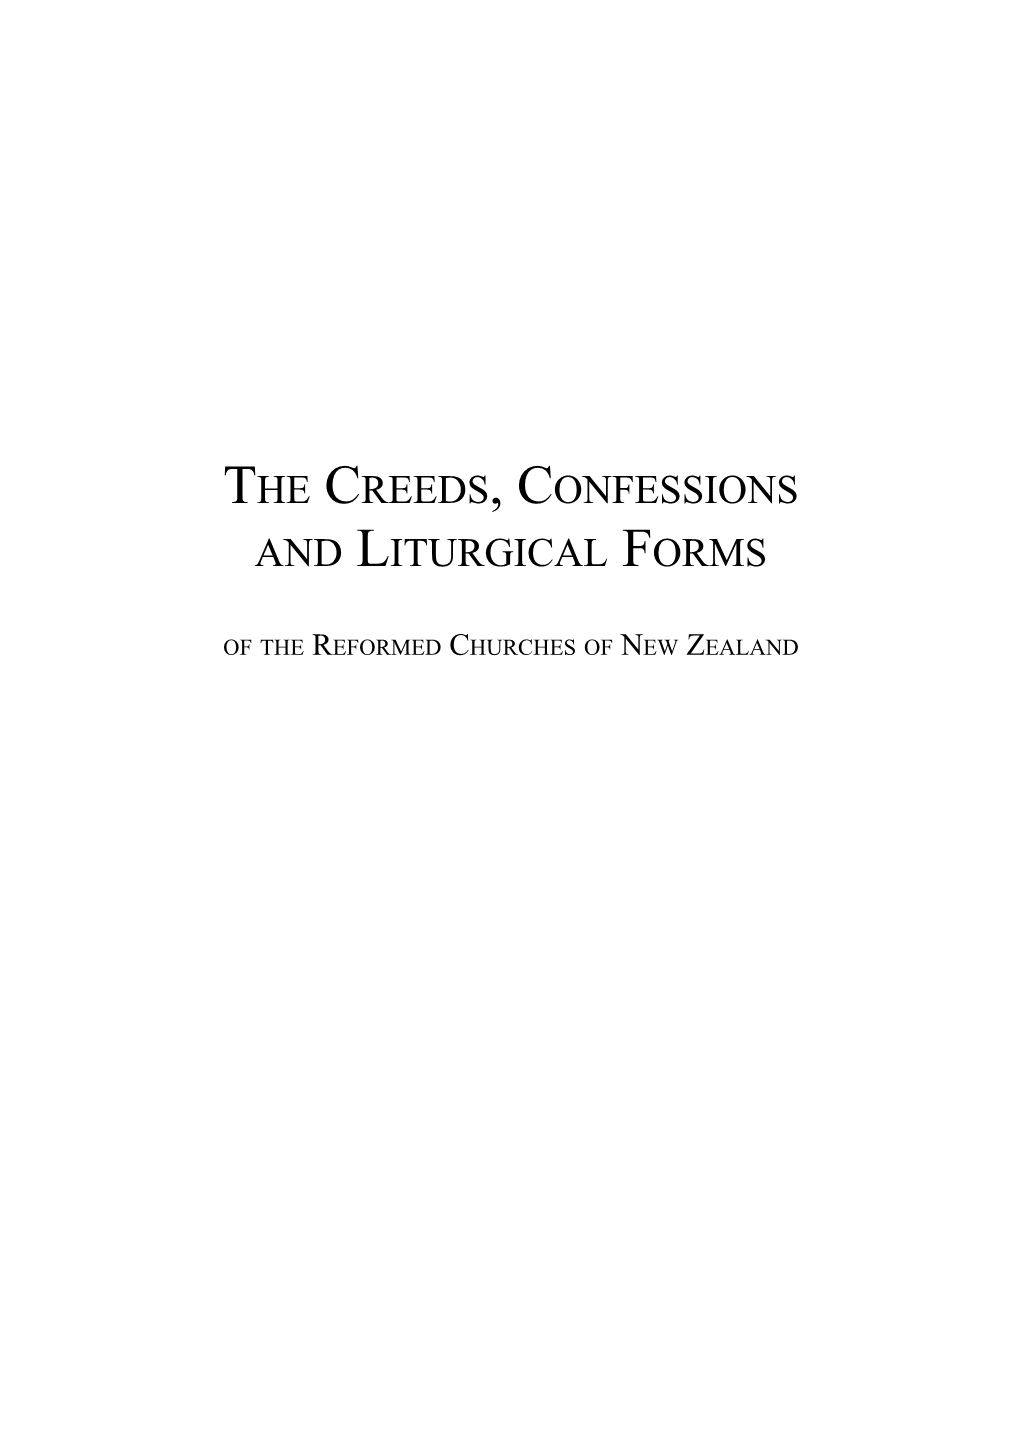 The Creeds, Confessions and Liturgical Forms of the Reformed Churches of New Zealand